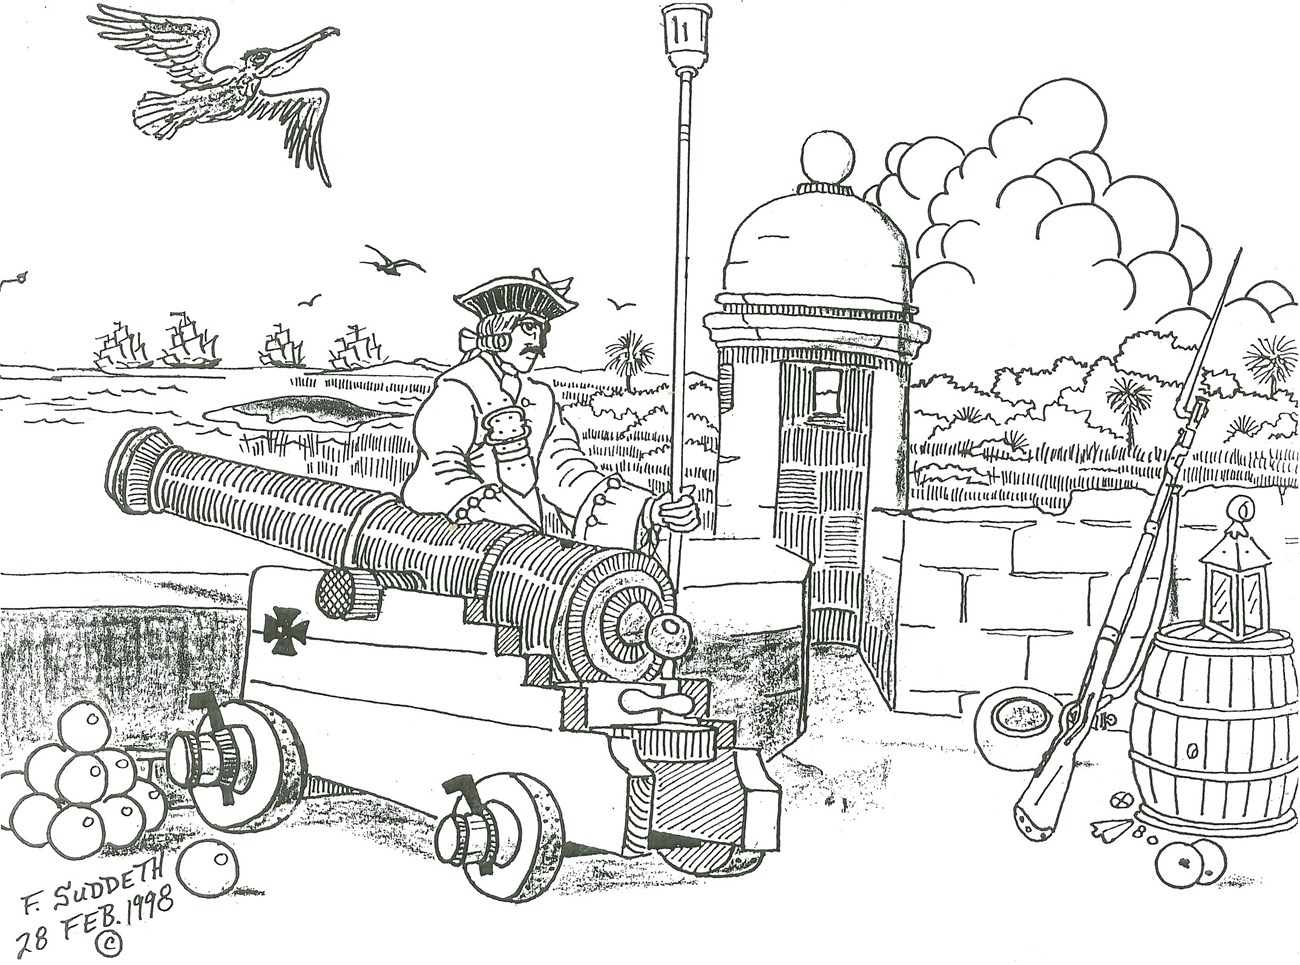 Coloring Page of Fort Matanzas gun deck after 1742 with Spanish soldier and cannon.